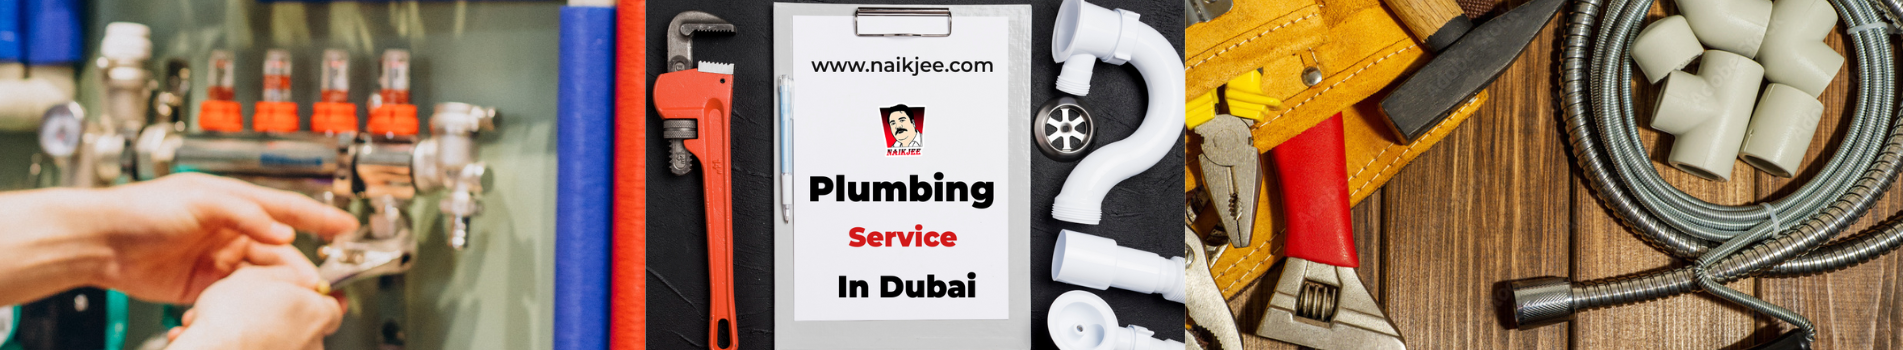 Introducing the Best Plumbing Services in Dubai and UAE - Naikjee